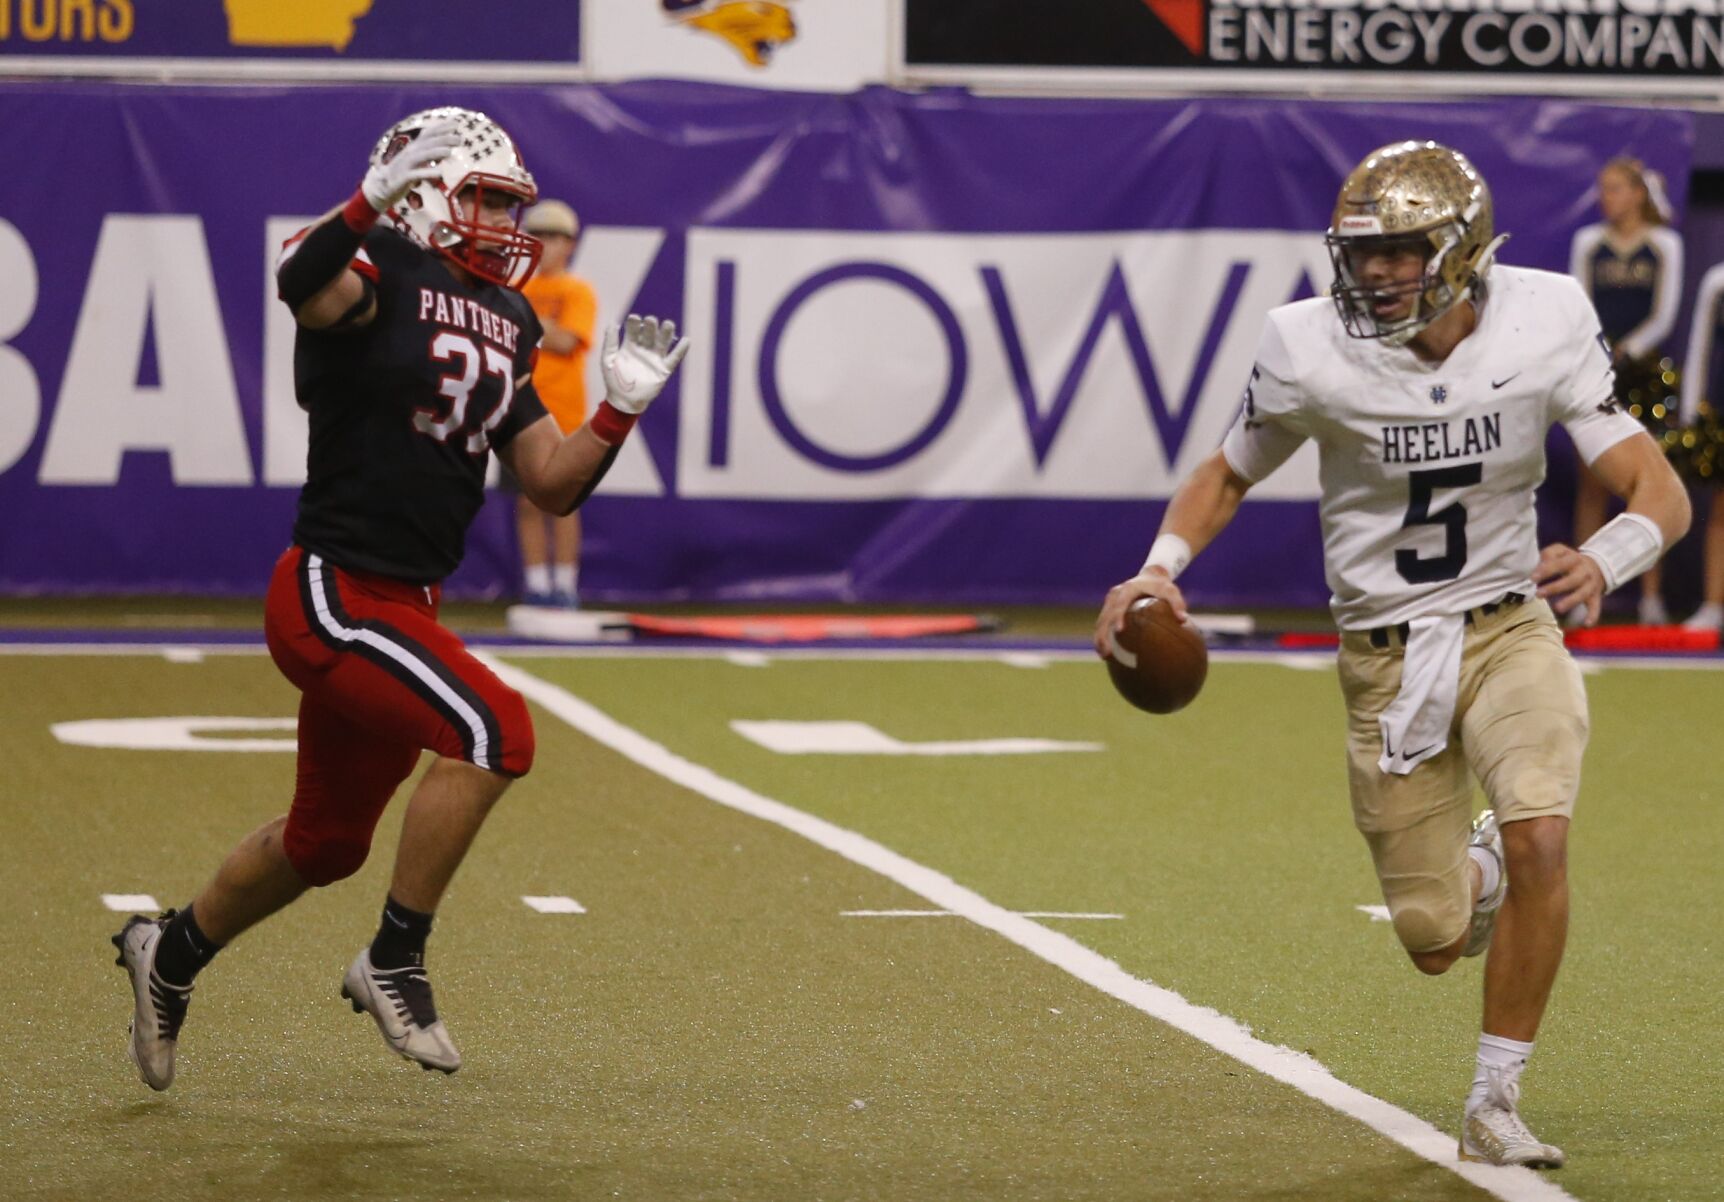 Bishop Heelan High School Stuns No. 1 Creston in Class 3A Semifinals with Selfless Teamwork and Strong Defense